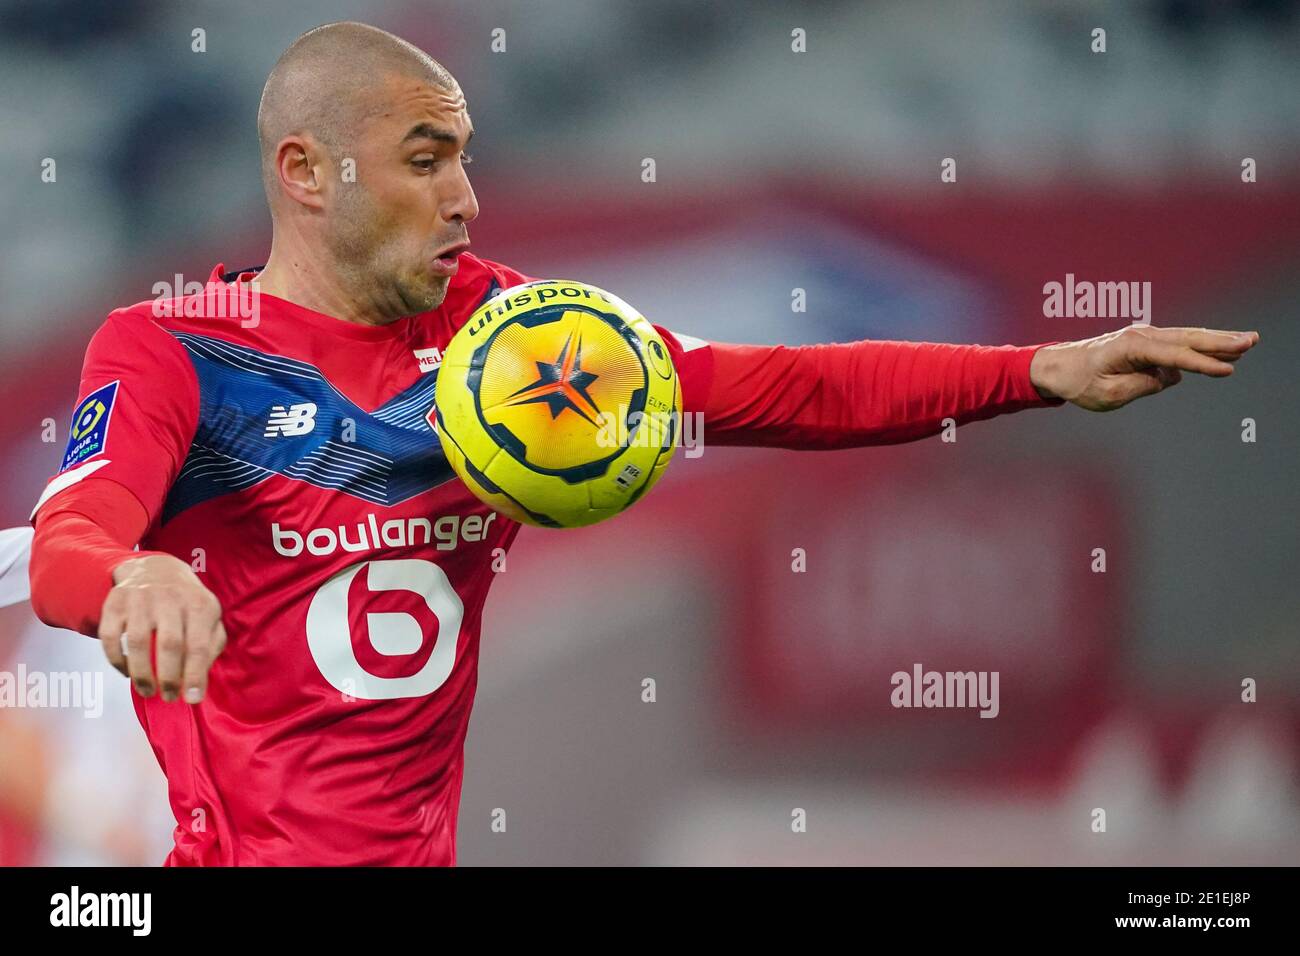 LILLE, FRANCE - JANUARY 6: Burak Yilmaz of Lille OSC during the Ligue 1 match between Lille OSC and Angers SCO at Stade Pierre Mauroy on January 6, 2021 in Lille, France (Photo by Jeroen Meuwsen/BSR Agency/Alamy Live News)*** Local Caption *** Burak Yilmaz Stock Photo